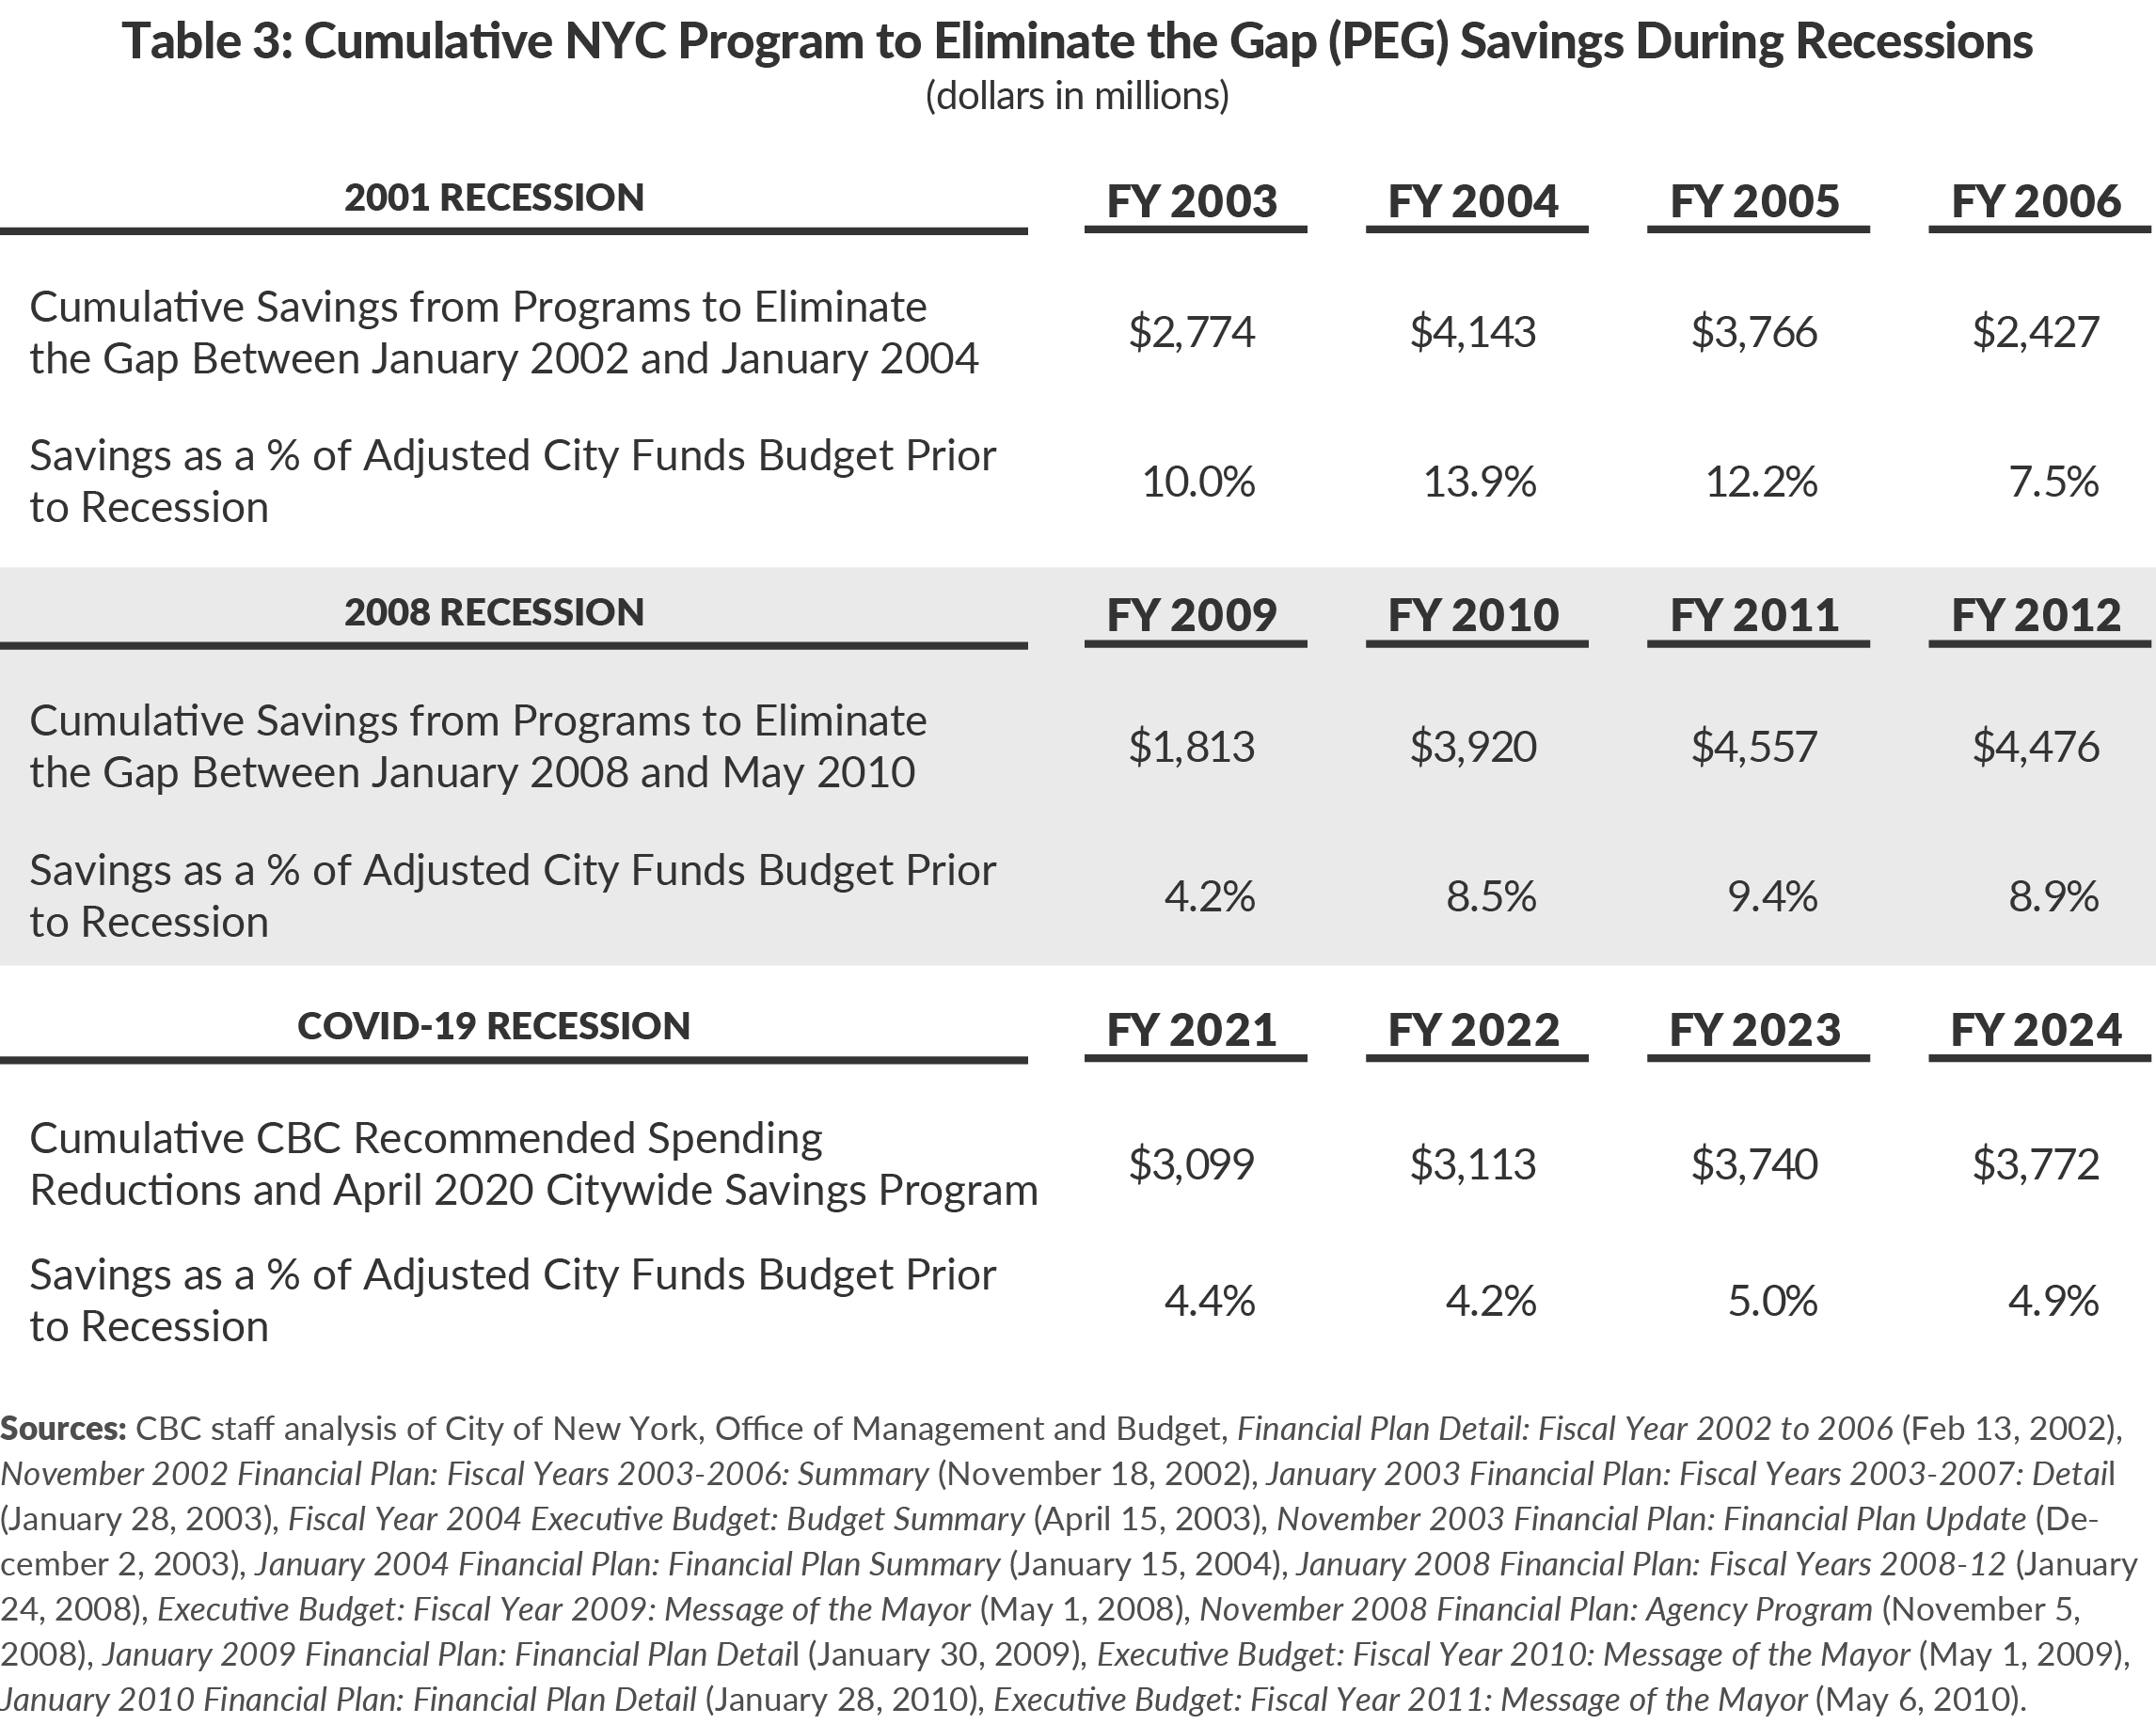 Table 3. Cumulative NYC Program to Eliminate the Gap (PEG) Savings During Recessions